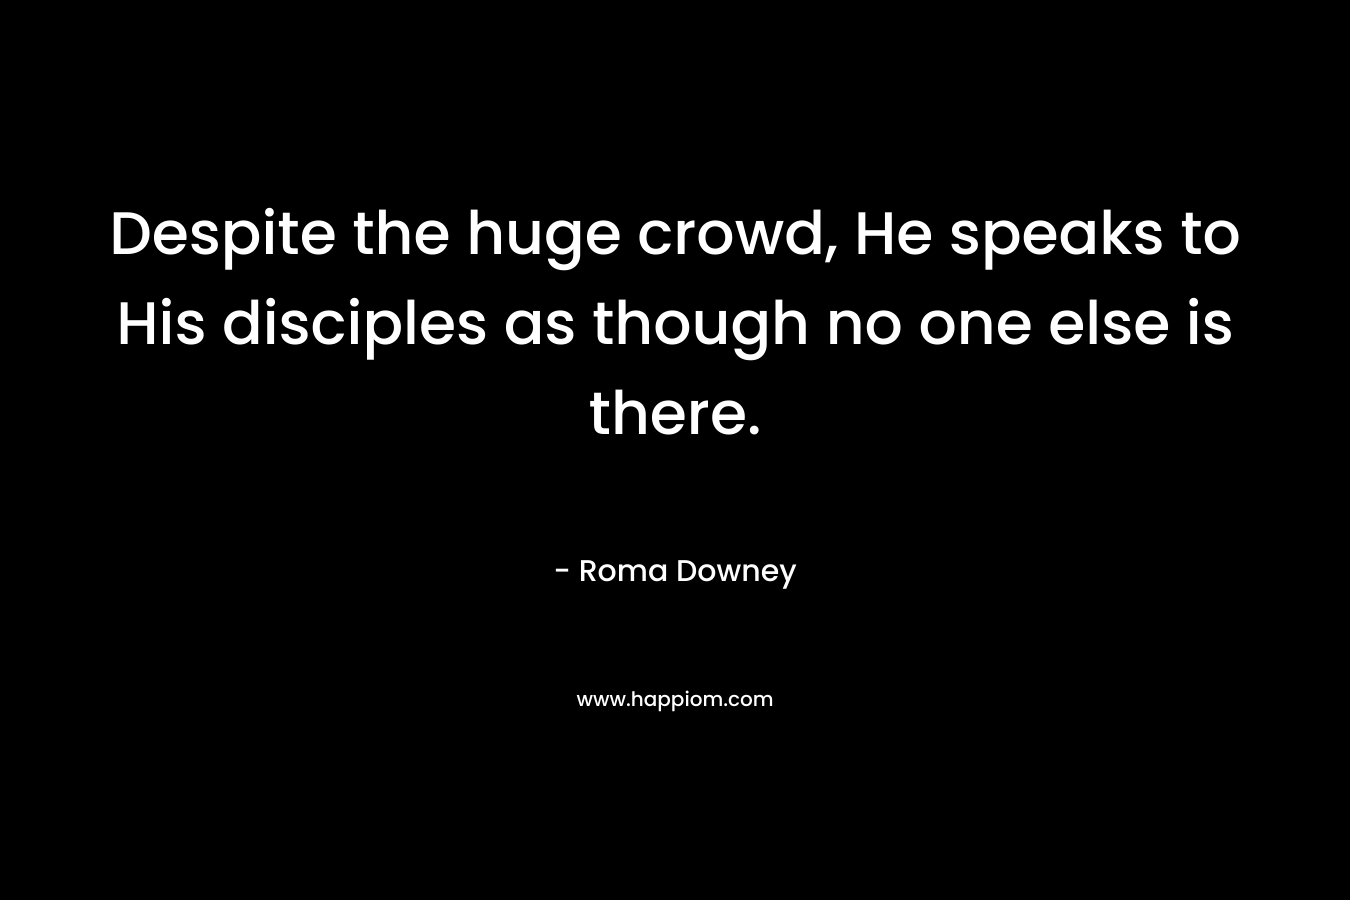 Despite the huge crowd, He speaks to His disciples as though no one else is there. – Roma Downey